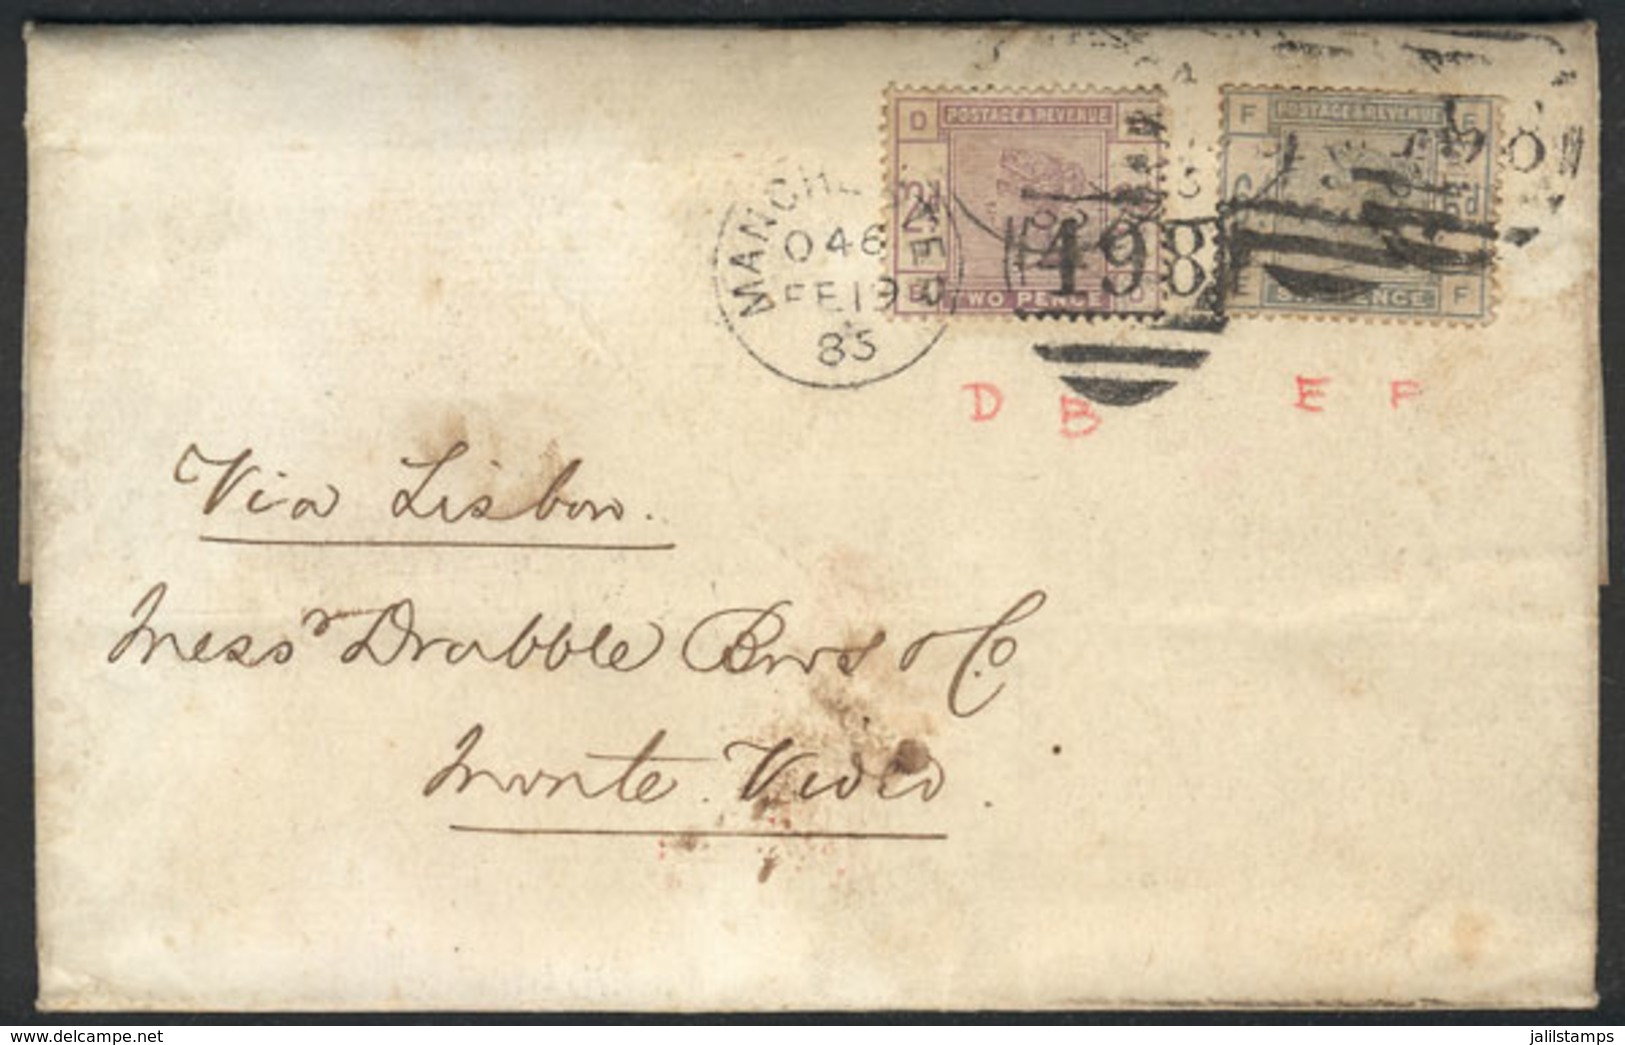 GREAT BRITAIN: 19/FE/1885 Manchester - Uruguay: Entire Letter Franked By Sc.100 + 105, With "498" Duplex Cancel, With Mo - ...-1840 Precursores